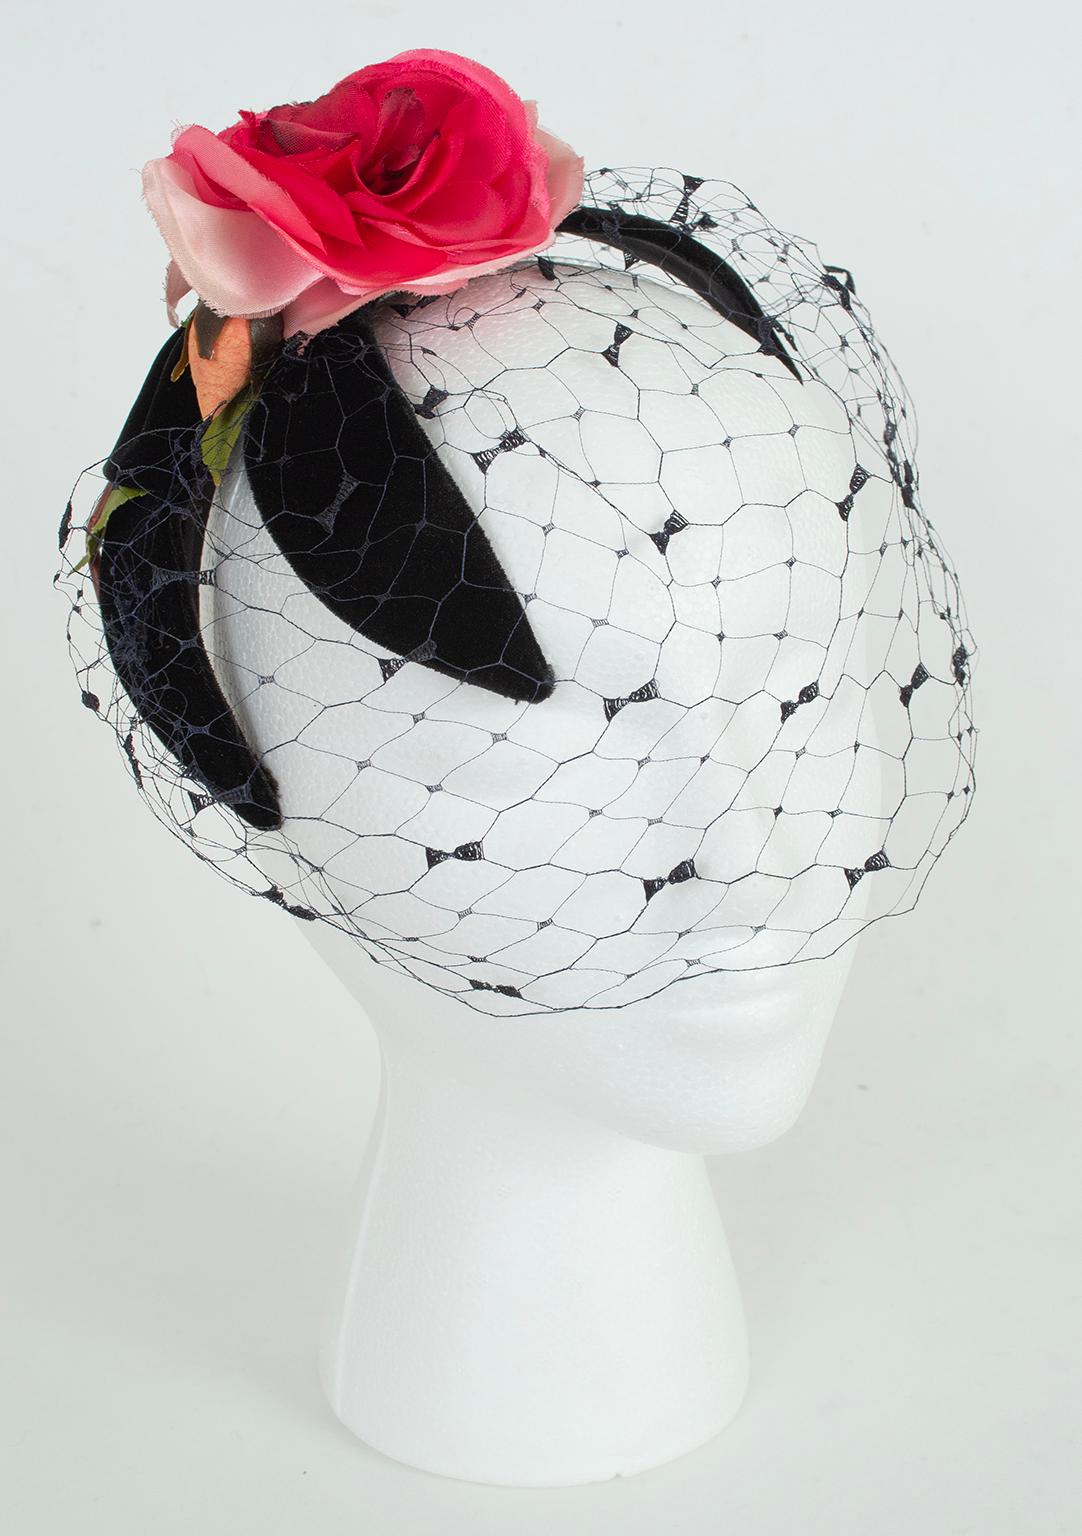 A hat that would make Isabella Blow’s heart flutter, this magnificent fascinator sits atop the head via black velvet “petals” that fan from the crown of the head to the ears. A perfect pink satin rose sits at the top center beneath which a black